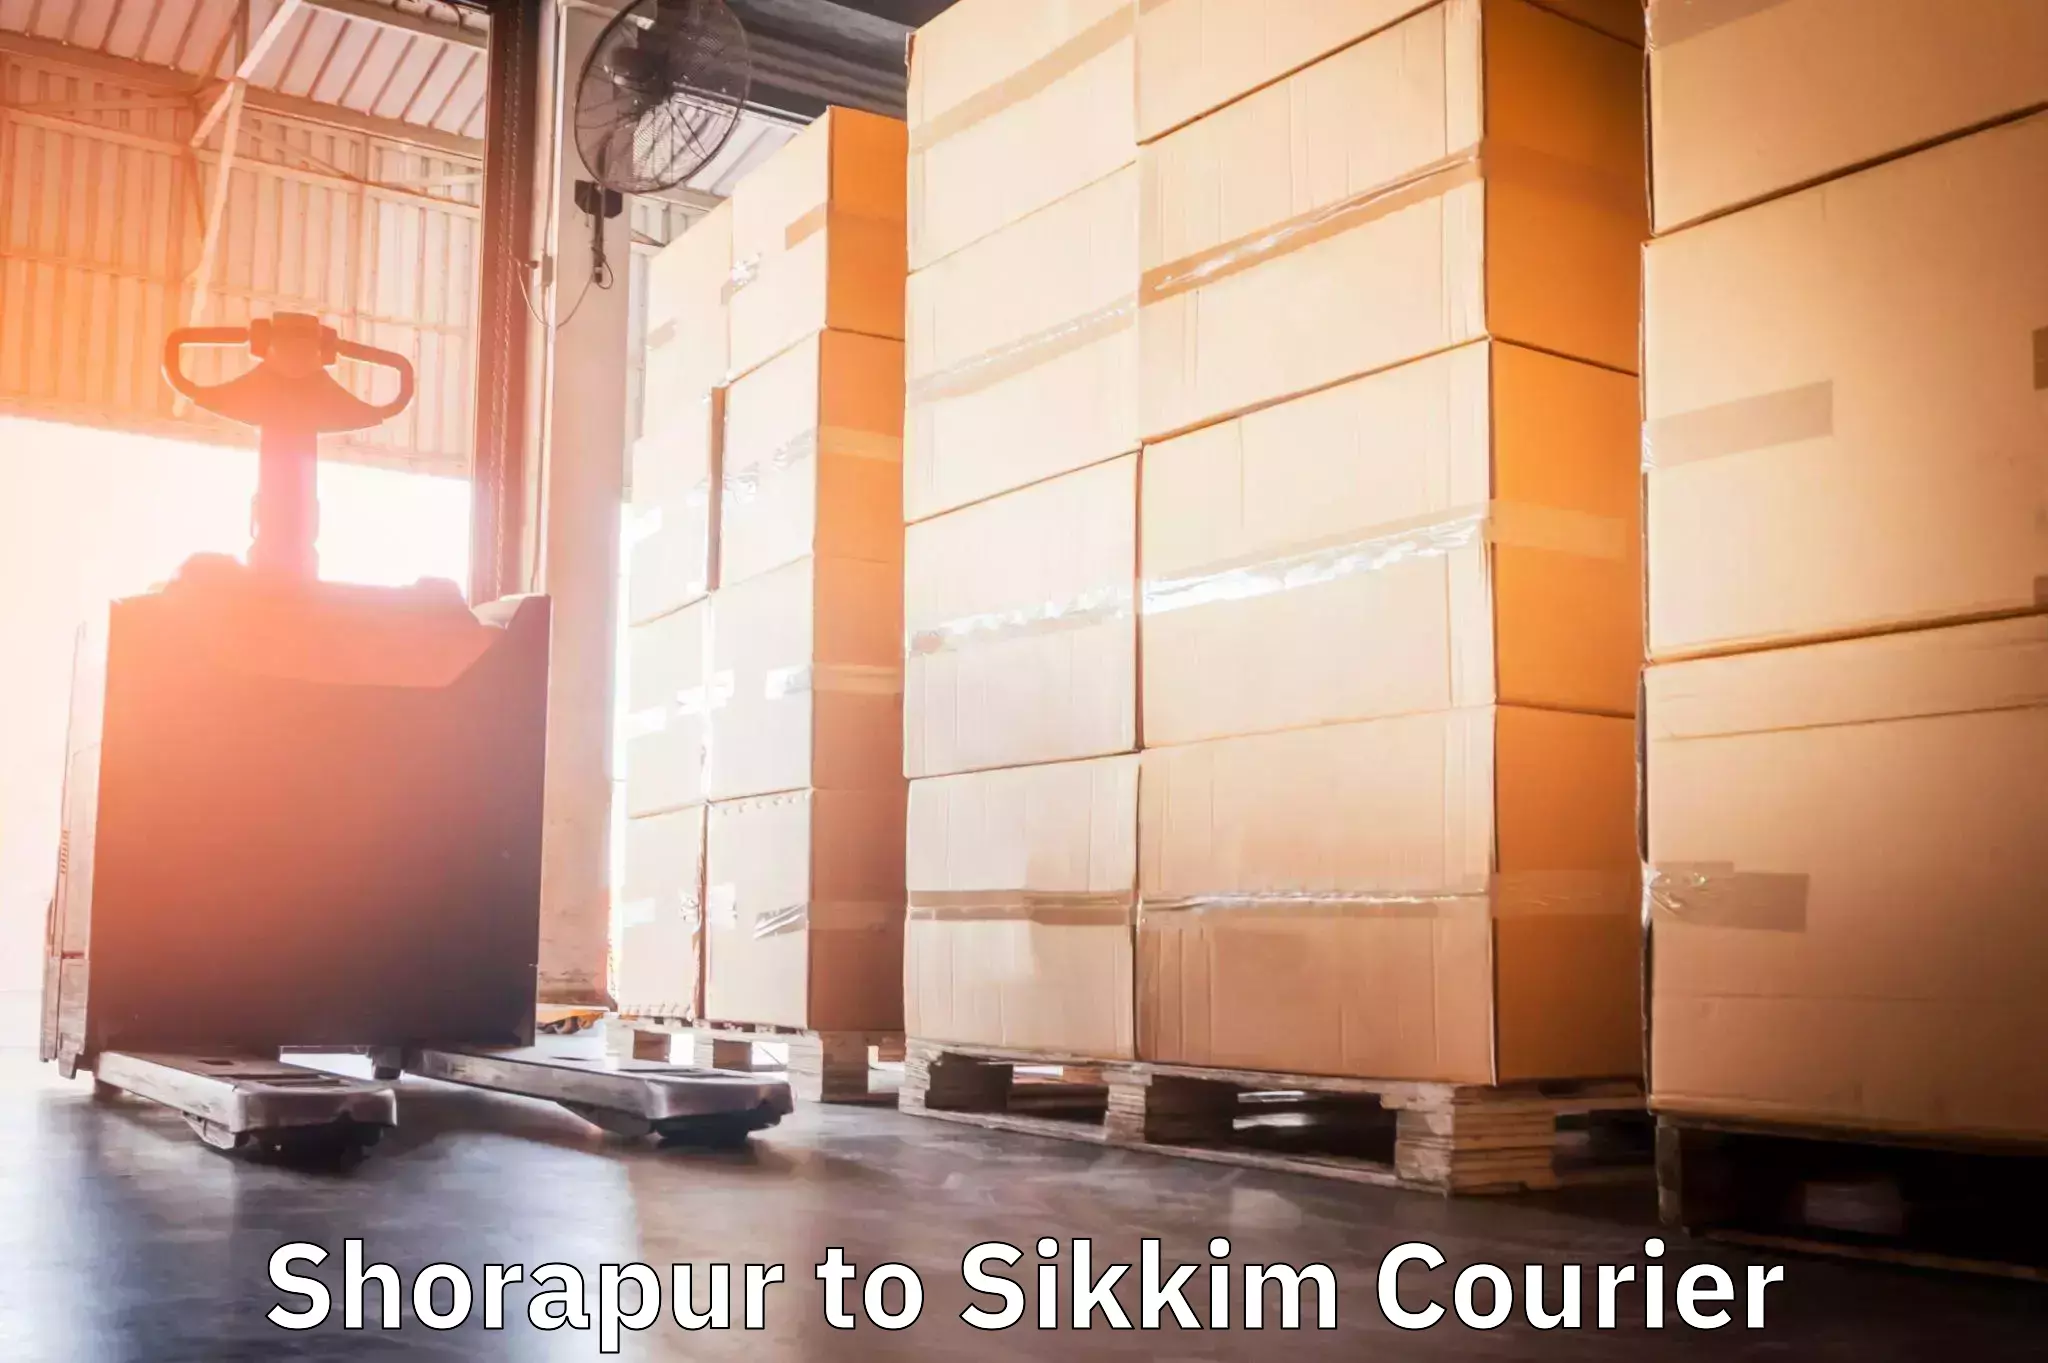 Local courier options in Shorapur to East Sikkim